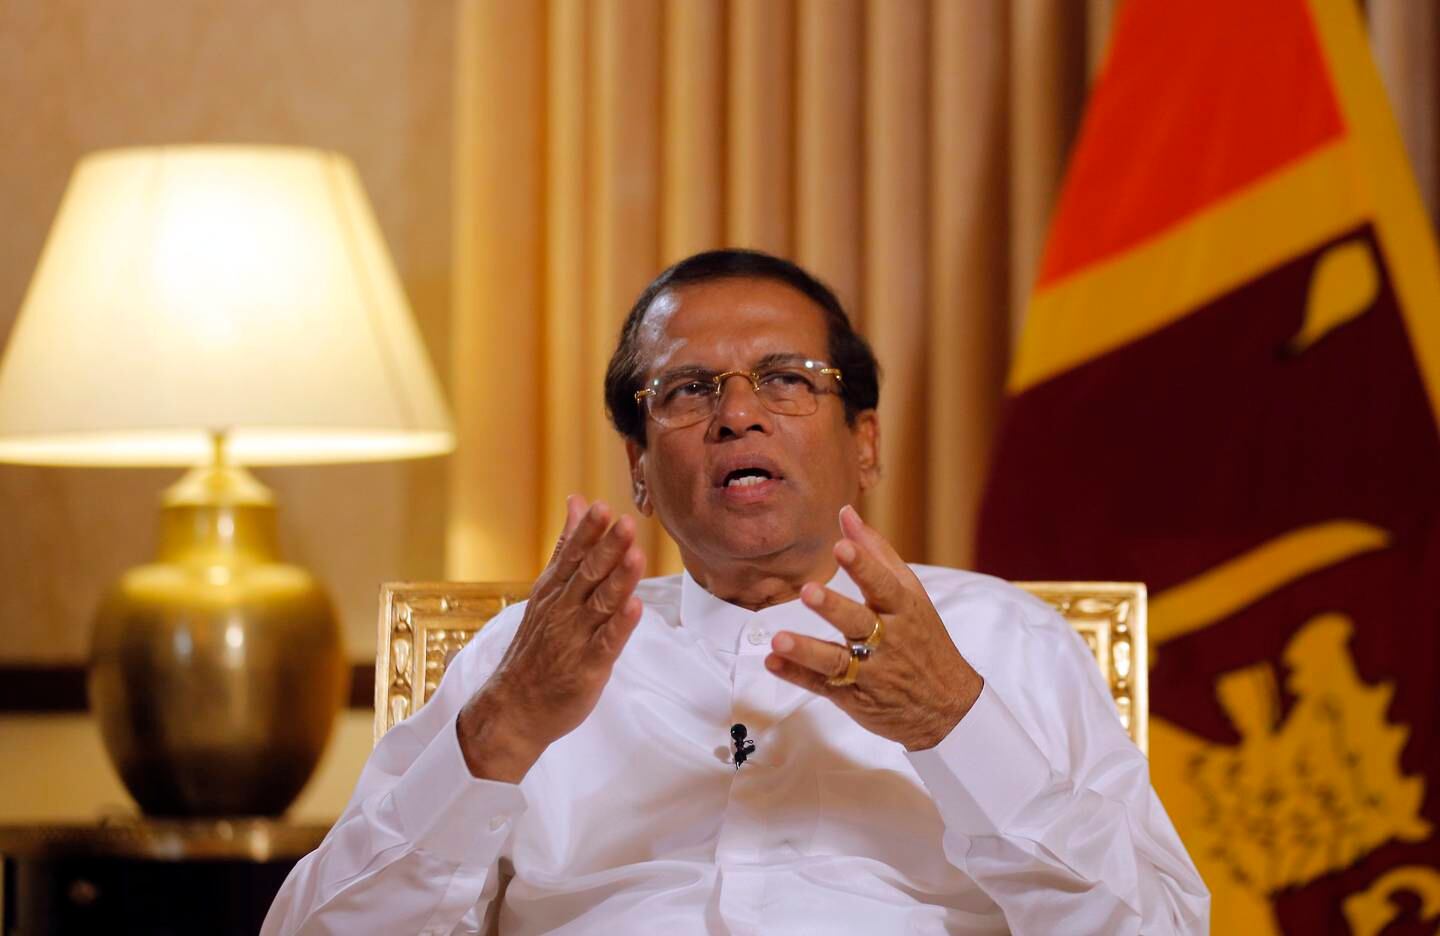 Sri Lankan President Maithripala Sirisena speaks during an interview with the Associated Press at his residence in Colombo, Sri Lanka, Tuesday, May 7, 2019. Sirisena  says Äú99%Äù of the suspects in Easter Sunday attacks on churches and hotels have been arrested and their explosive materials seized. (AP Photo/Eranga Jayawardena)